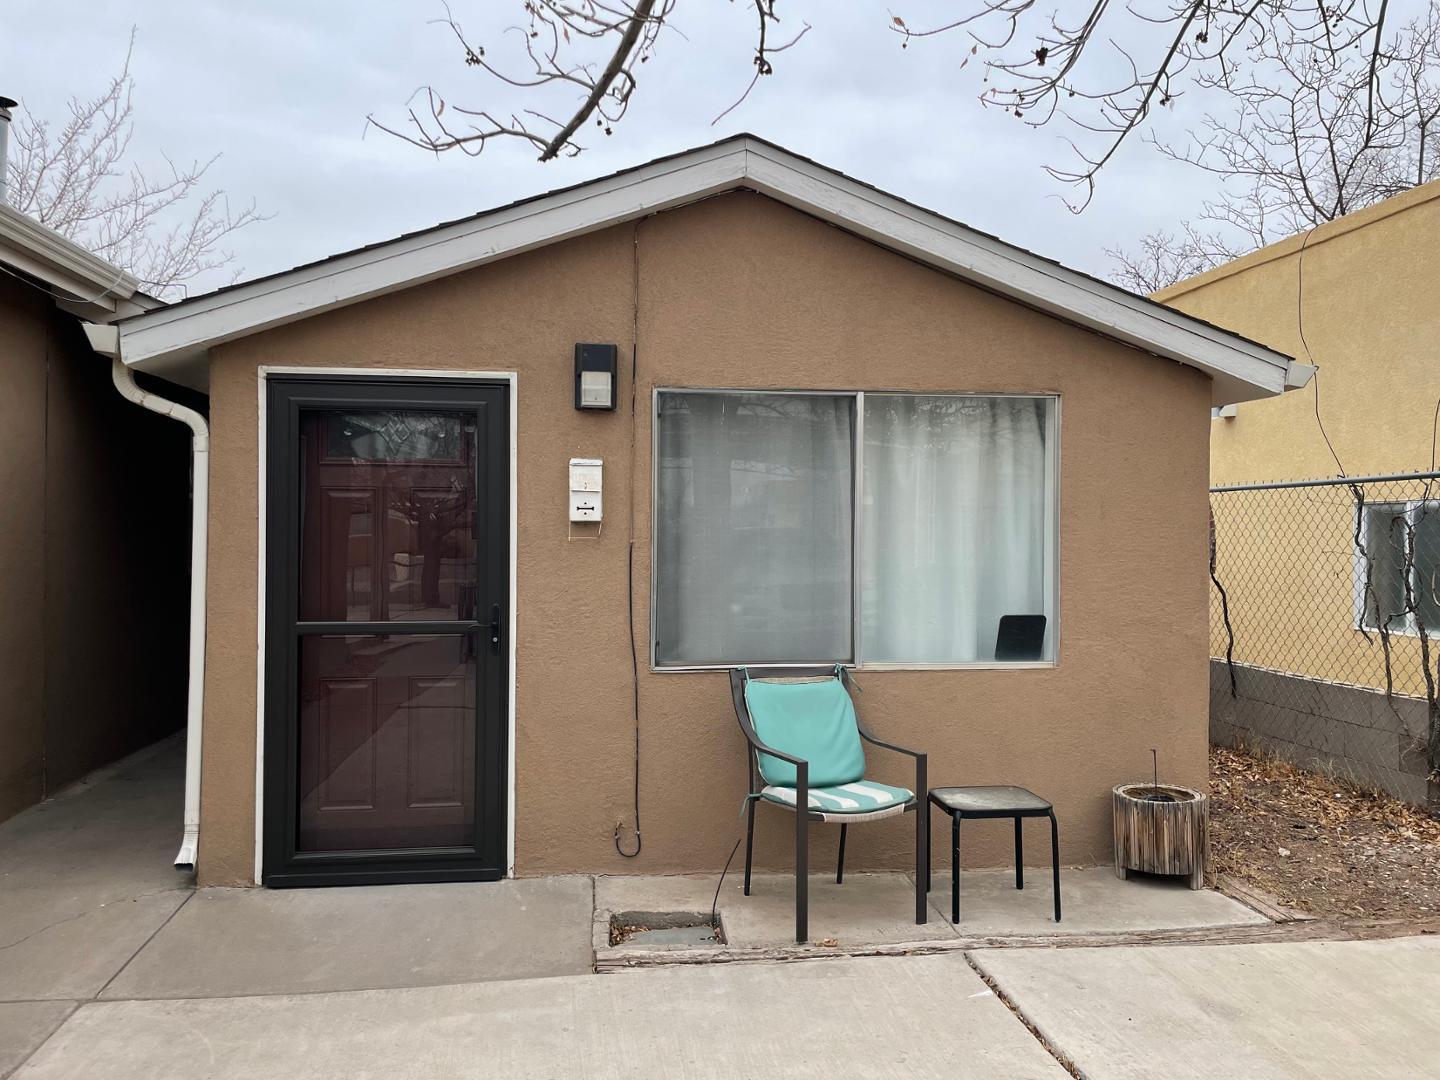 917 Headingly NW, Albuquerque, New Mexico 87107, ,1 BathroomBathrooms,Residential Lease,For Rent,917 Headingly NW,1059401